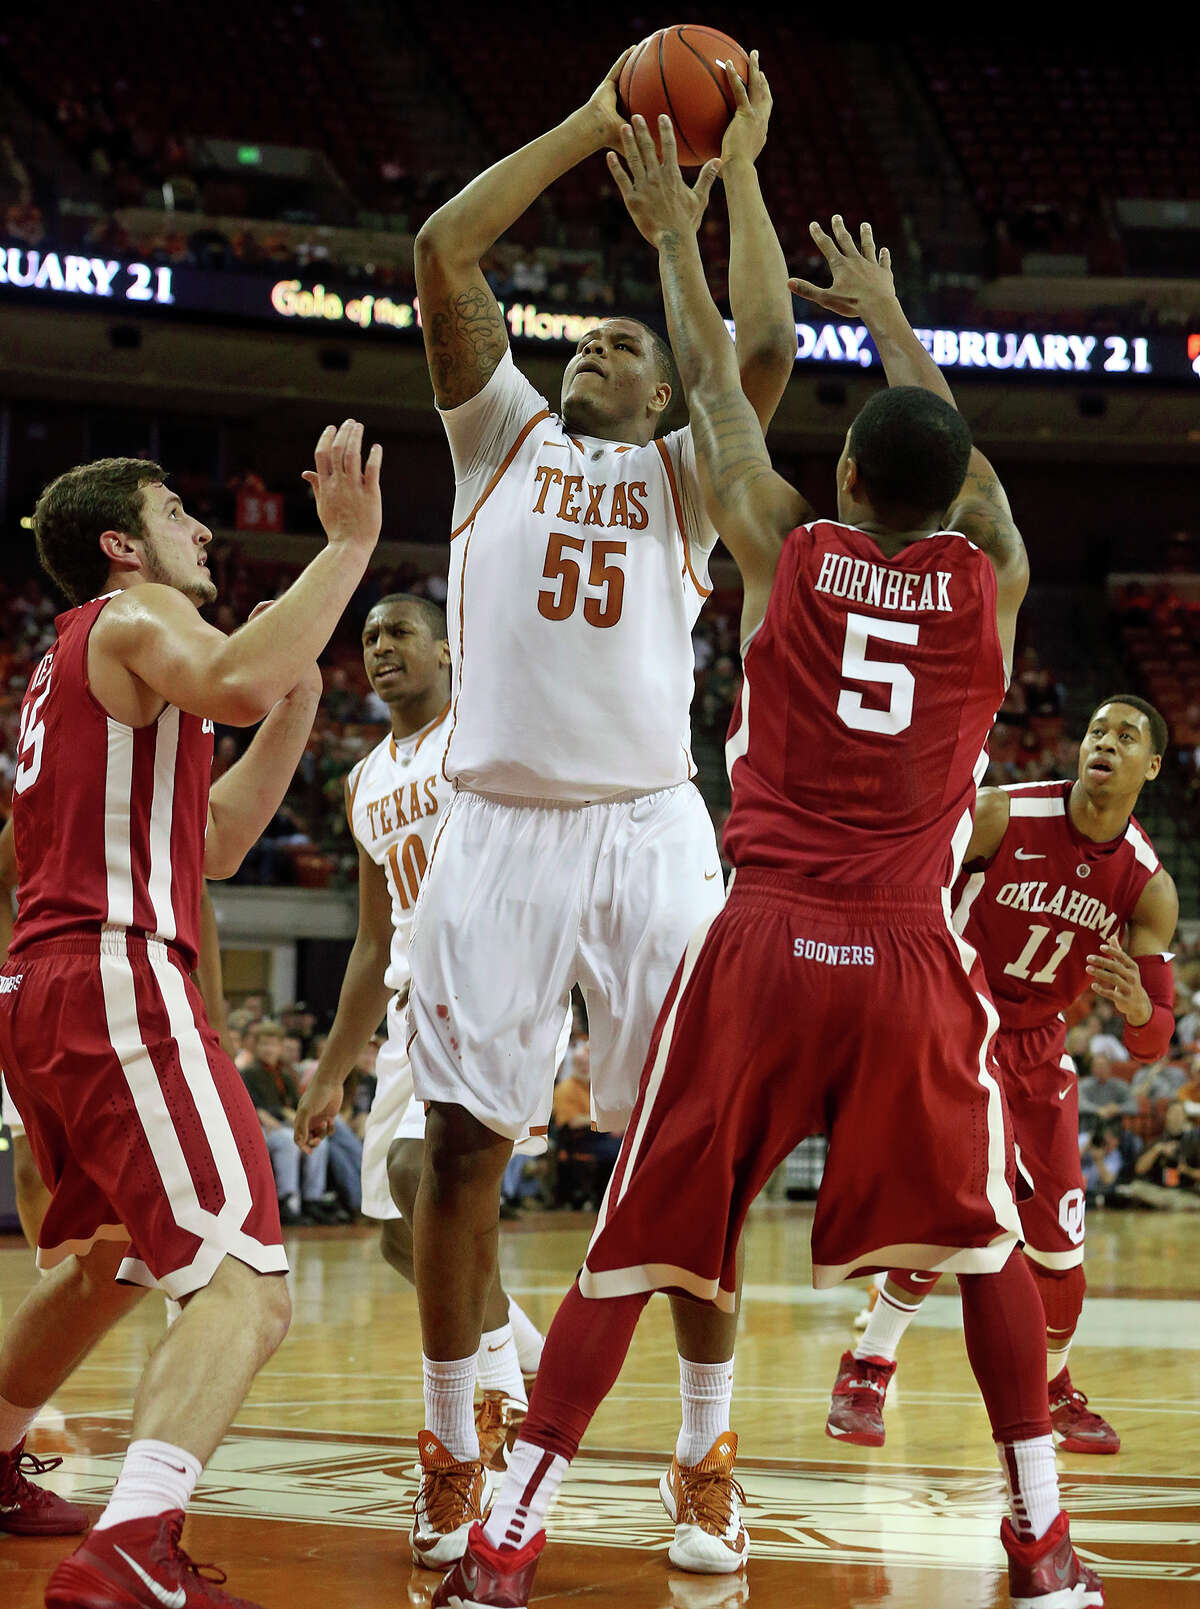 Texas center Cameron Ridley takes a jumper in the lane in the first half as the Longhorns play Oklahoma in the Erwin Center on January 4, 2014.